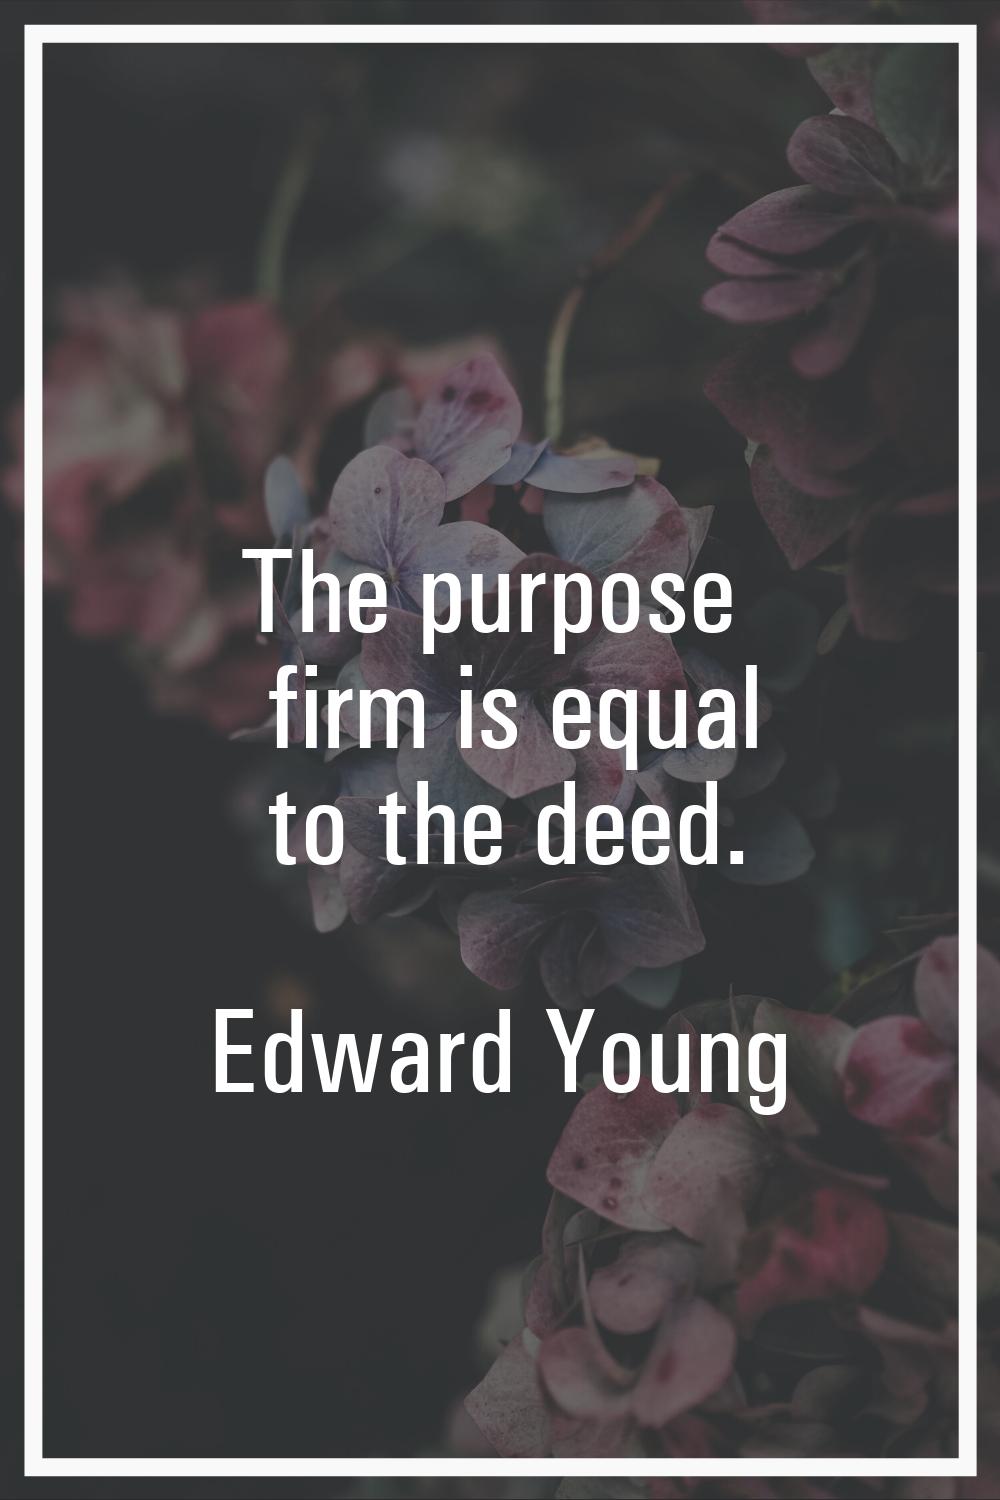 The purpose firm is equal to the deed.